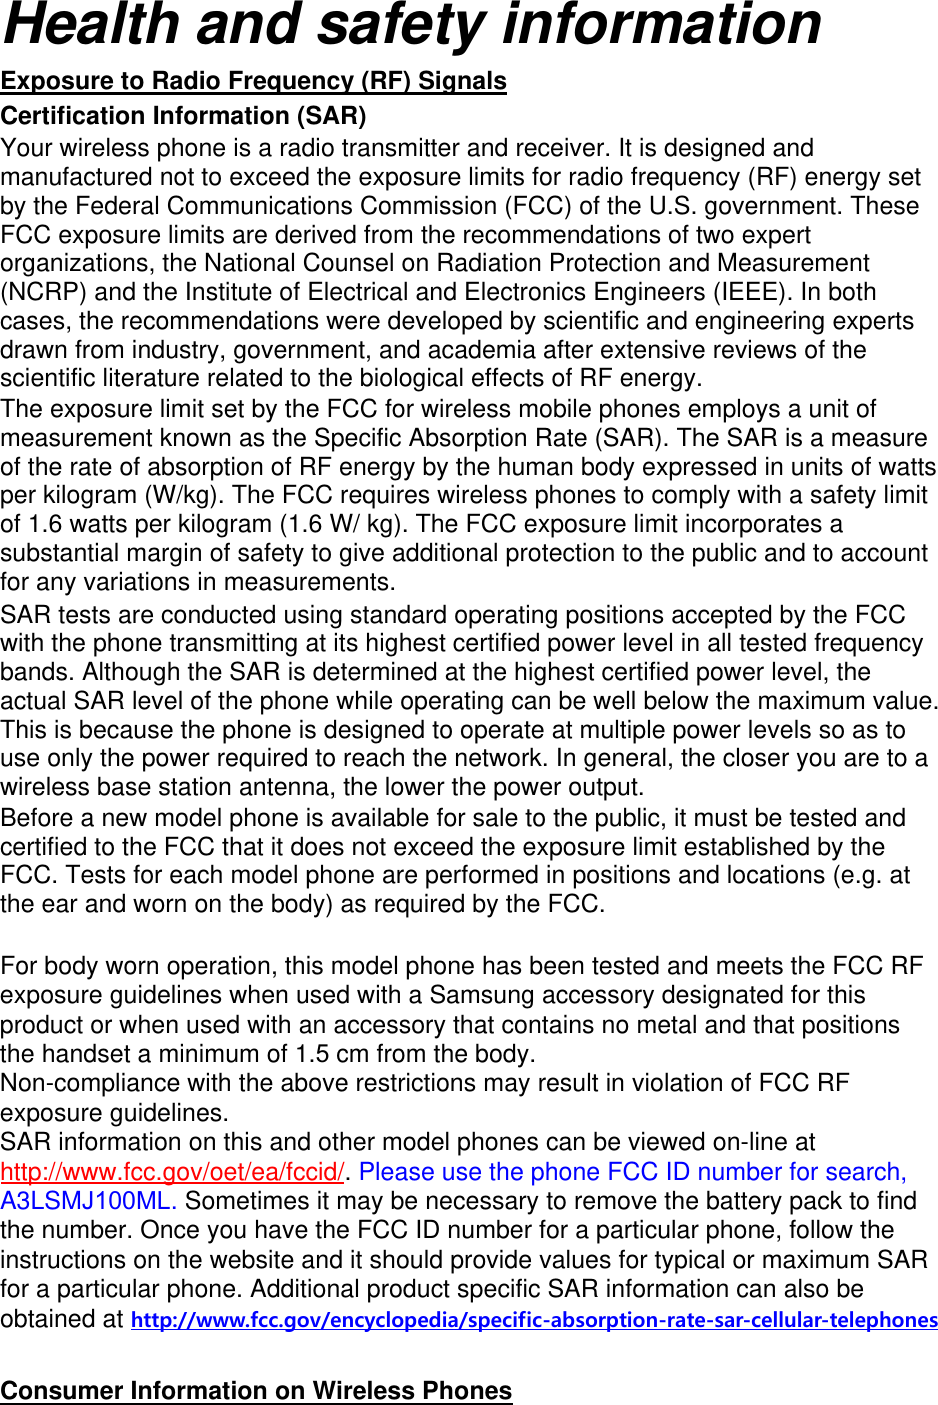 Health and safety information Exposure to Radio Frequency (RF) Signals Certification Information (SAR) Your wireless phone is a radio transmitter and receiver. It is designed and manufactured not to exceed the exposure limits for radio frequency (RF) energy set by the Federal Communications Commission (FCC) of the U.S. government. These FCC exposure limits are derived from the recommendations of two expert organizations, the National Counsel on Radiation Protection and Measurement (NCRP) and the Institute of Electrical and Electronics Engineers (IEEE). In both cases, the recommendations were developed by scientific and engineering experts drawn from industry, government, and academia after extensive reviews of the scientific literature related to the biological effects of RF energy. The exposure limit set by the FCC for wireless mobile phones employs a unit of measurement known as the Specific Absorption Rate (SAR). The SAR is a measure of the rate of absorption of RF energy by the human body expressed in units of watts per kilogram (W/kg). The FCC requires wireless phones to comply with a safety limit of 1.6 watts per kilogram (1.6 W/ kg). The FCC exposure limit incorporates a substantial margin of safety to give additional protection to the public and to account for any variations in measurements. SAR tests are conducted using standard operating positions accepted by the FCC with the phone transmitting at its highest certified power level in all tested frequency bands. Although the SAR is determined at the highest certified power level, the actual SAR level of the phone while operating can be well below the maximum value. This is because the phone is designed to operate at multiple power levels so as to use only the power required to reach the network. In general, the closer you are to a wireless base station antenna, the lower the power output. Before a new model phone is available for sale to the public, it must be tested and certified to the FCC that it does not exceed the exposure limit established by the FCC. Tests for each model phone are performed in positions and locations (e.g. at the ear and worn on the body) as required by the FCC.     For body worn operation, this model phone has been tested and meets the FCC RF exposure guidelines when used with a Samsung accessory designated for this product or when used with an accessory that contains no metal and that positions the handset a minimum of 1.5 cm from the body.  Non-compliance with the above restrictions may result in violation of FCC RF exposure guidelines. SAR information on this and other model phones can be viewed on-line at http://www.fcc.gov/oet/ea/fccid/. Please use the phone FCC ID number for search, A3LSMJ100ML. Sometimes it may be necessary to remove the battery pack to find the number. Once you have the FCC ID number for a particular phone, follow the instructions on the website and it should provide values for typical or maximum SAR for a particular phone. Additional product specific SAR information can also be obtained at http://www.fcc.gov/encyclopedia/specific-absorption-rate-sar-cellular-telephonesConsumer Information on Wireless Phones 